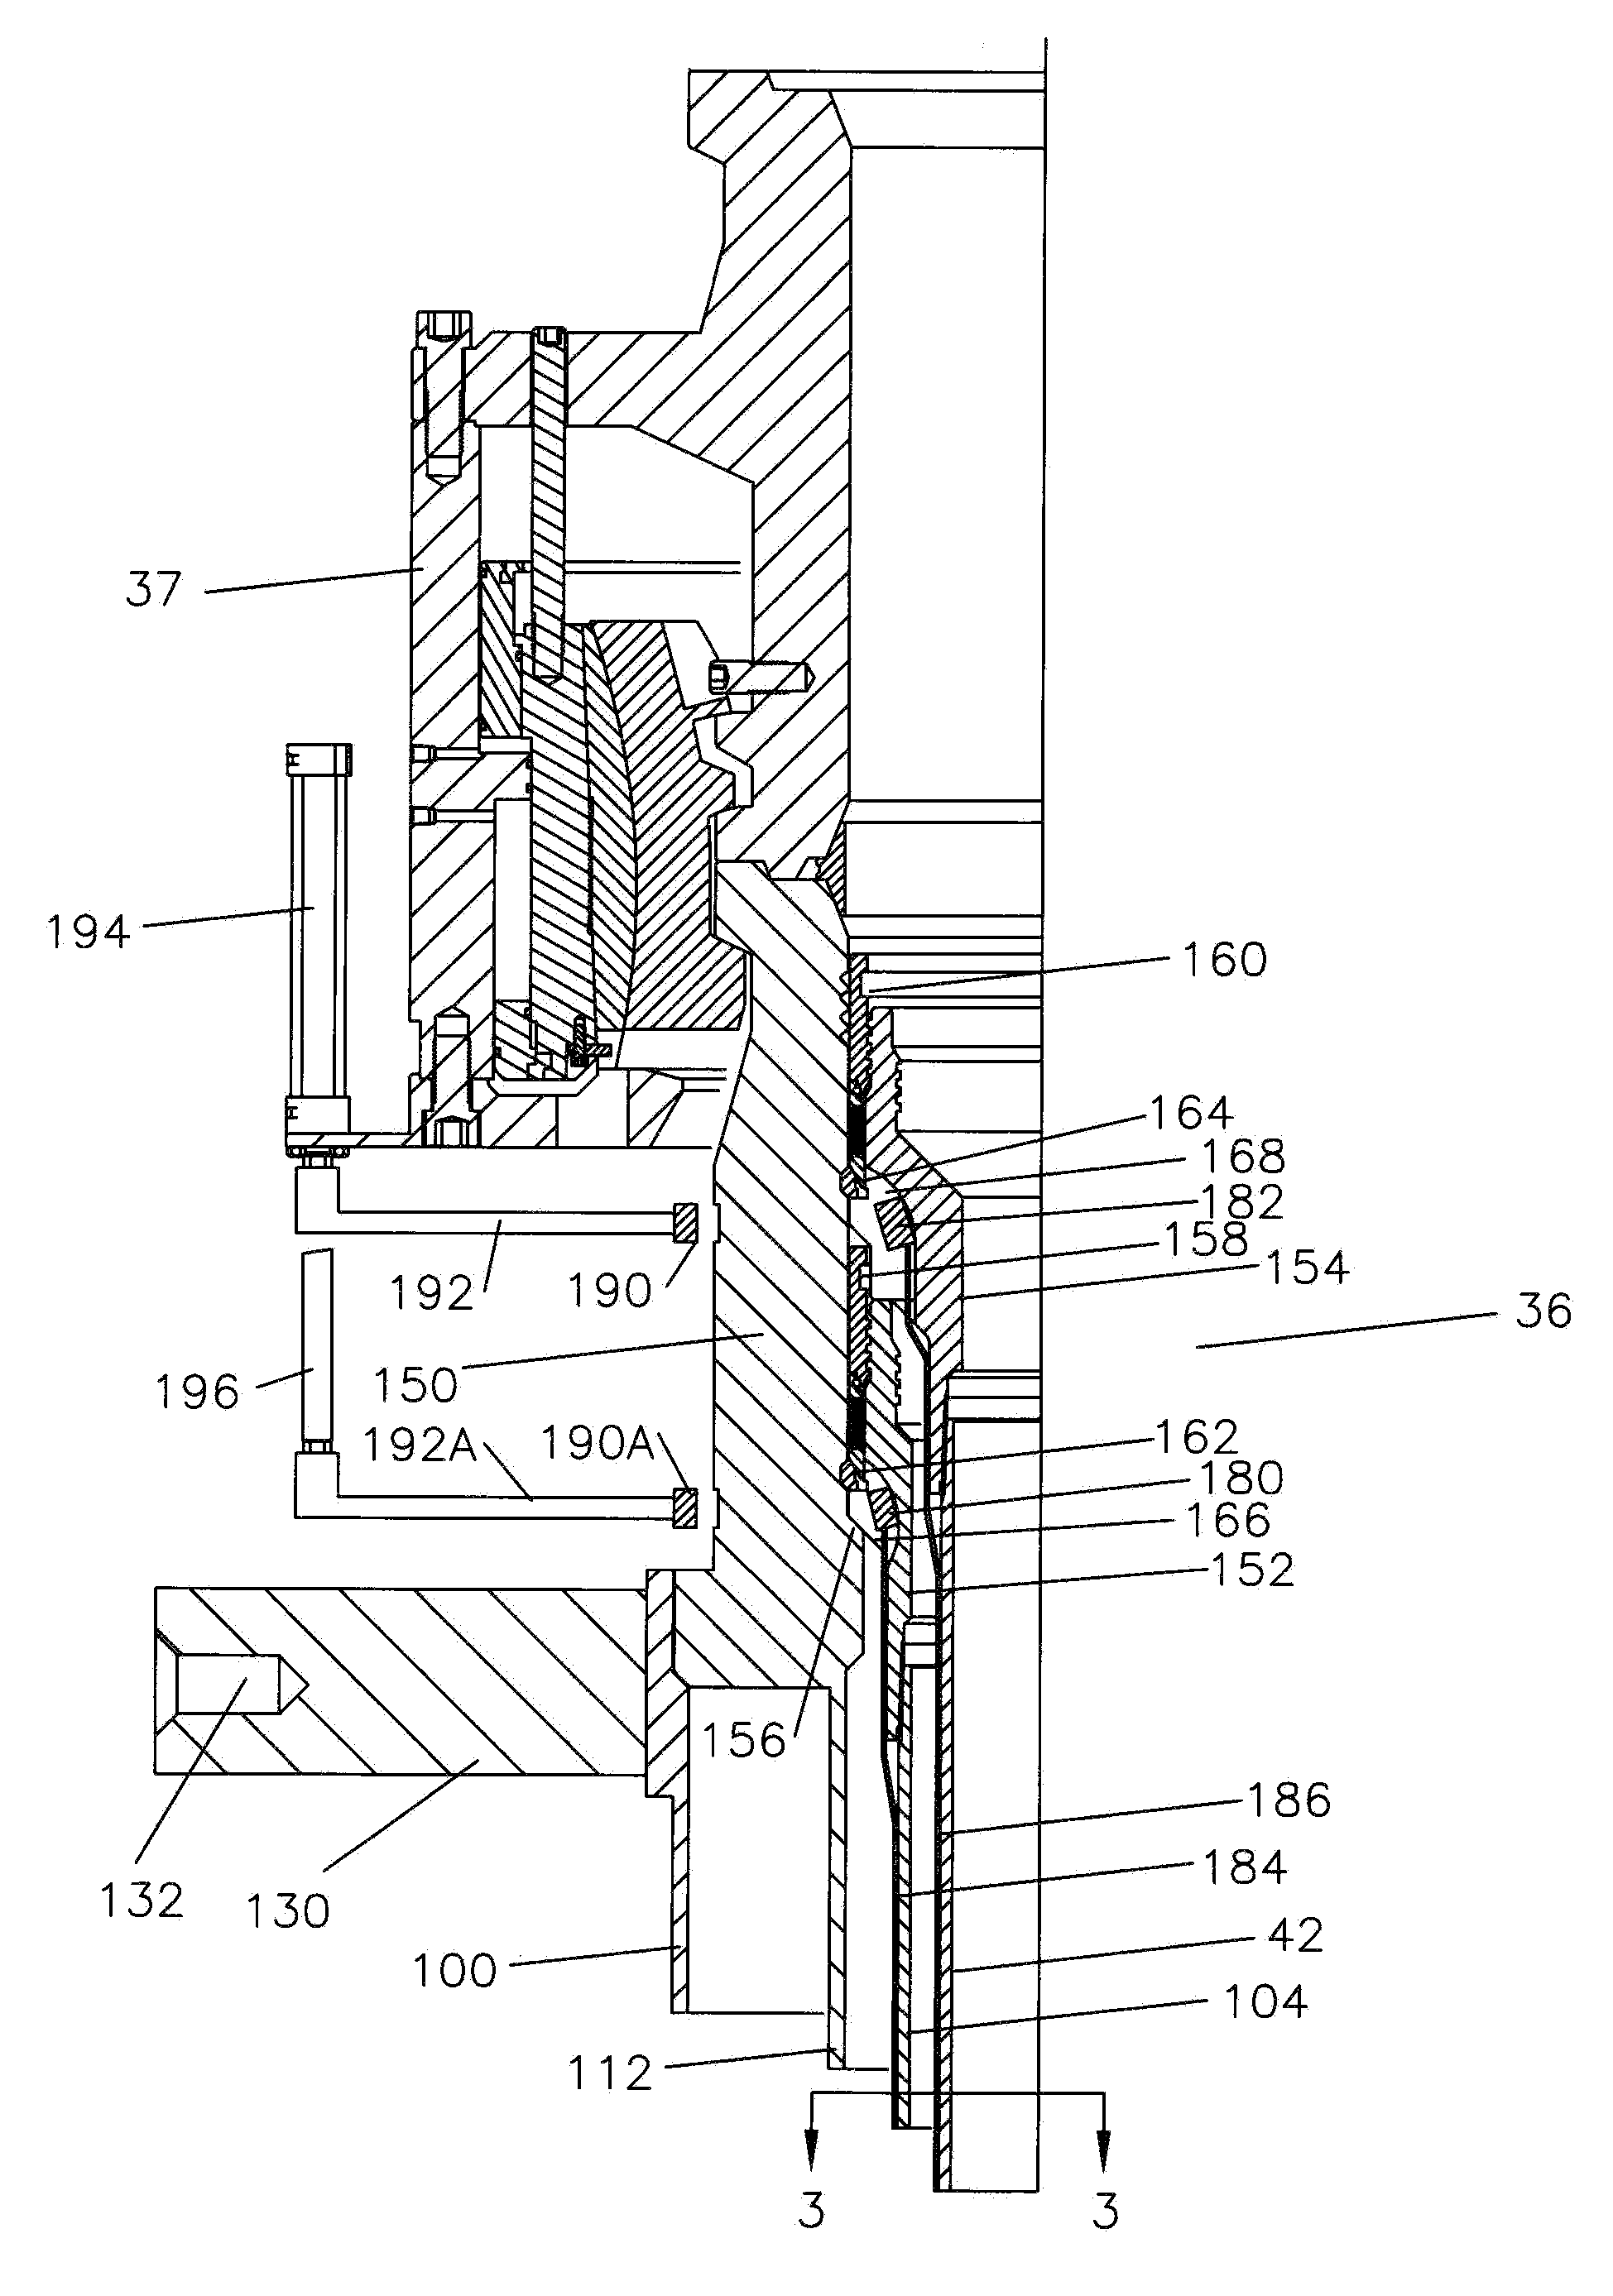 Method of non-intrusive communication of down hole annulus information